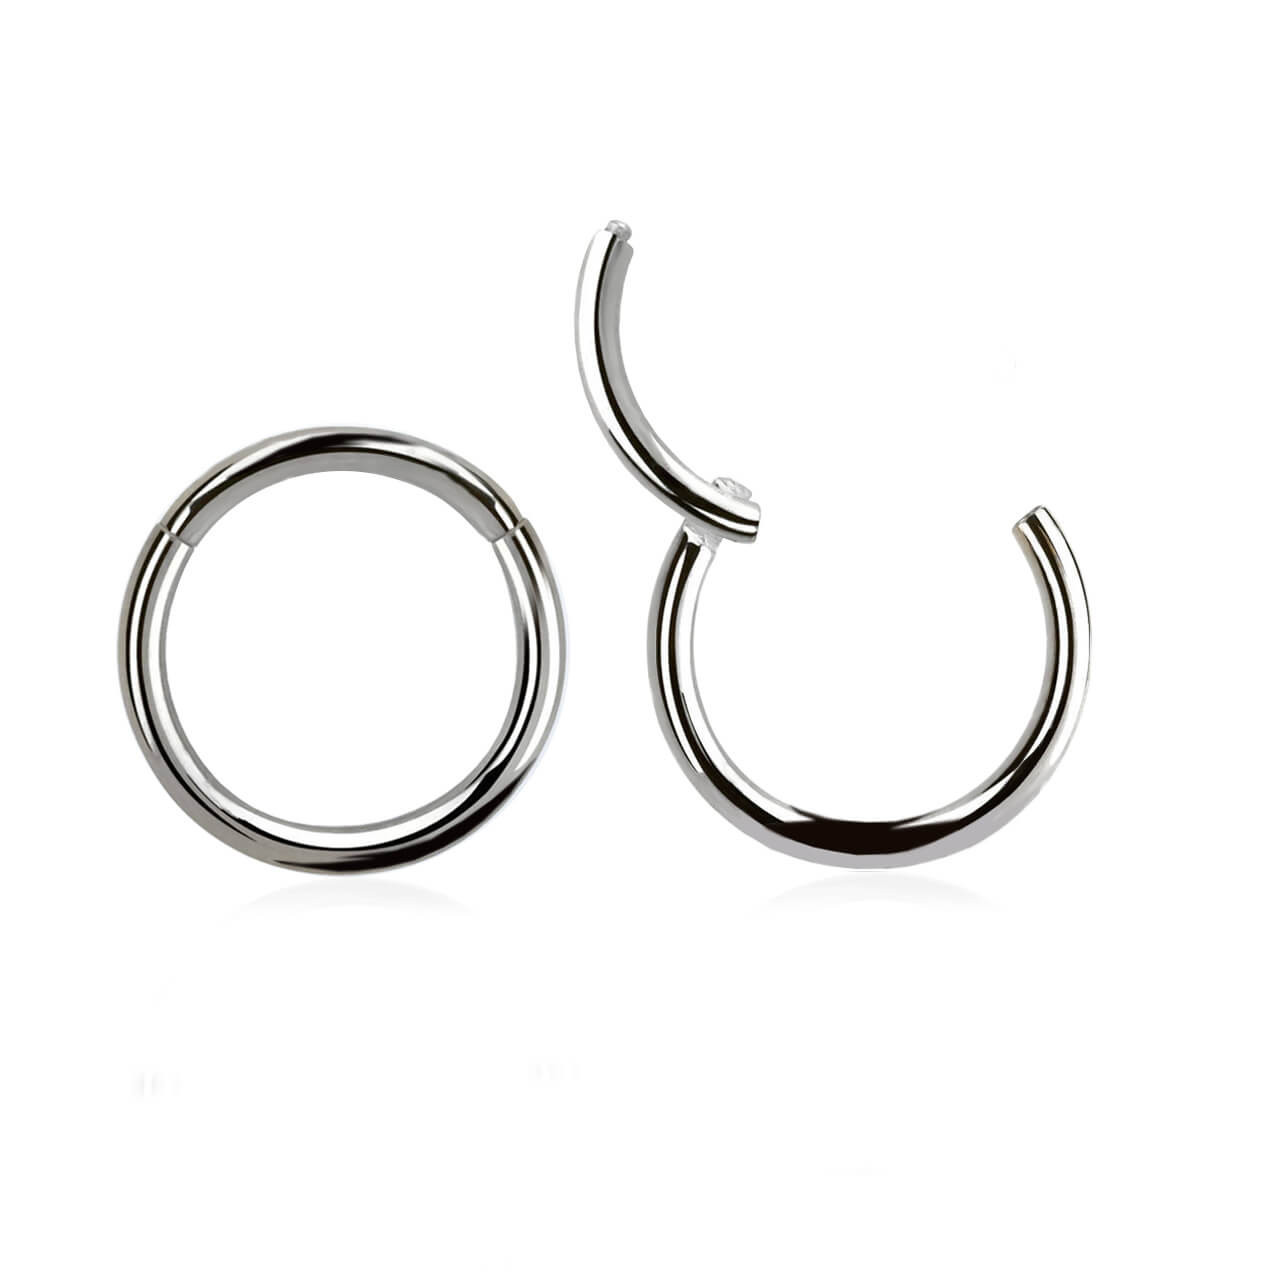 SSG01H Bulk Body Jewelry Pack of 10 surgical steel hinged segment rings, Thickness 1mm